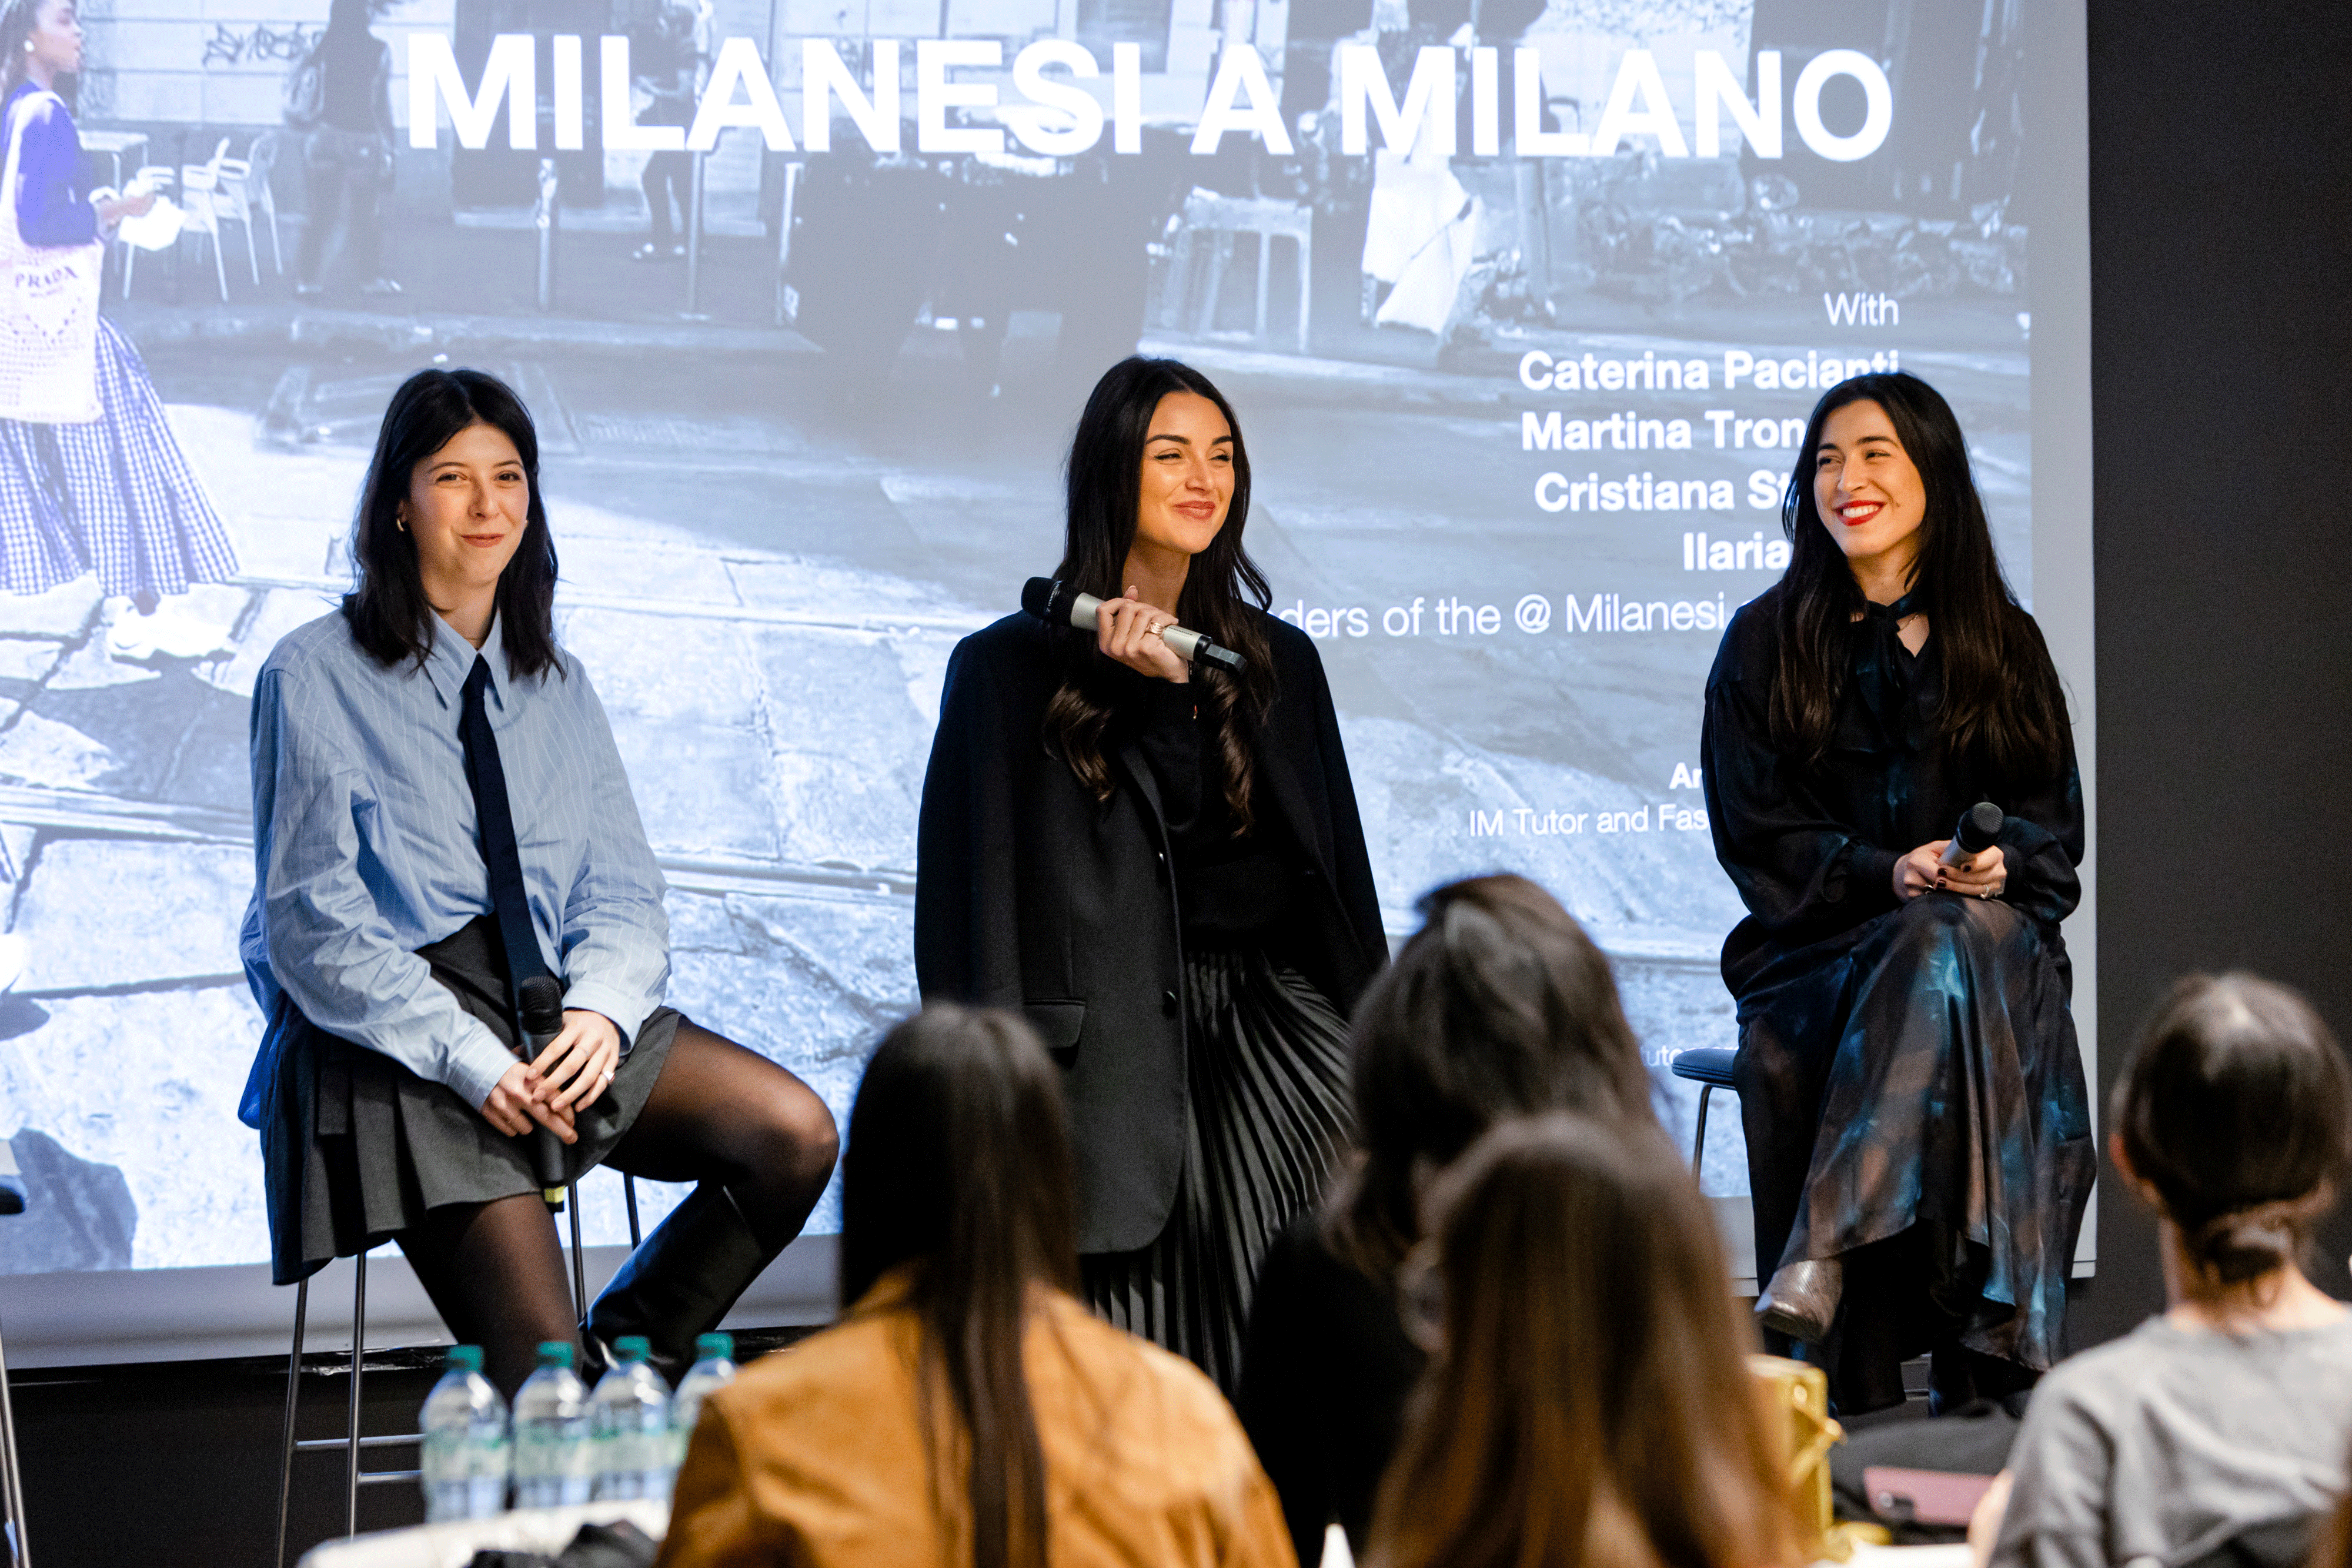 The young professionals behind the Instagram sensation 'Milanesi a Milano' discussing during the talk at Istituto Marangoni in Milan.